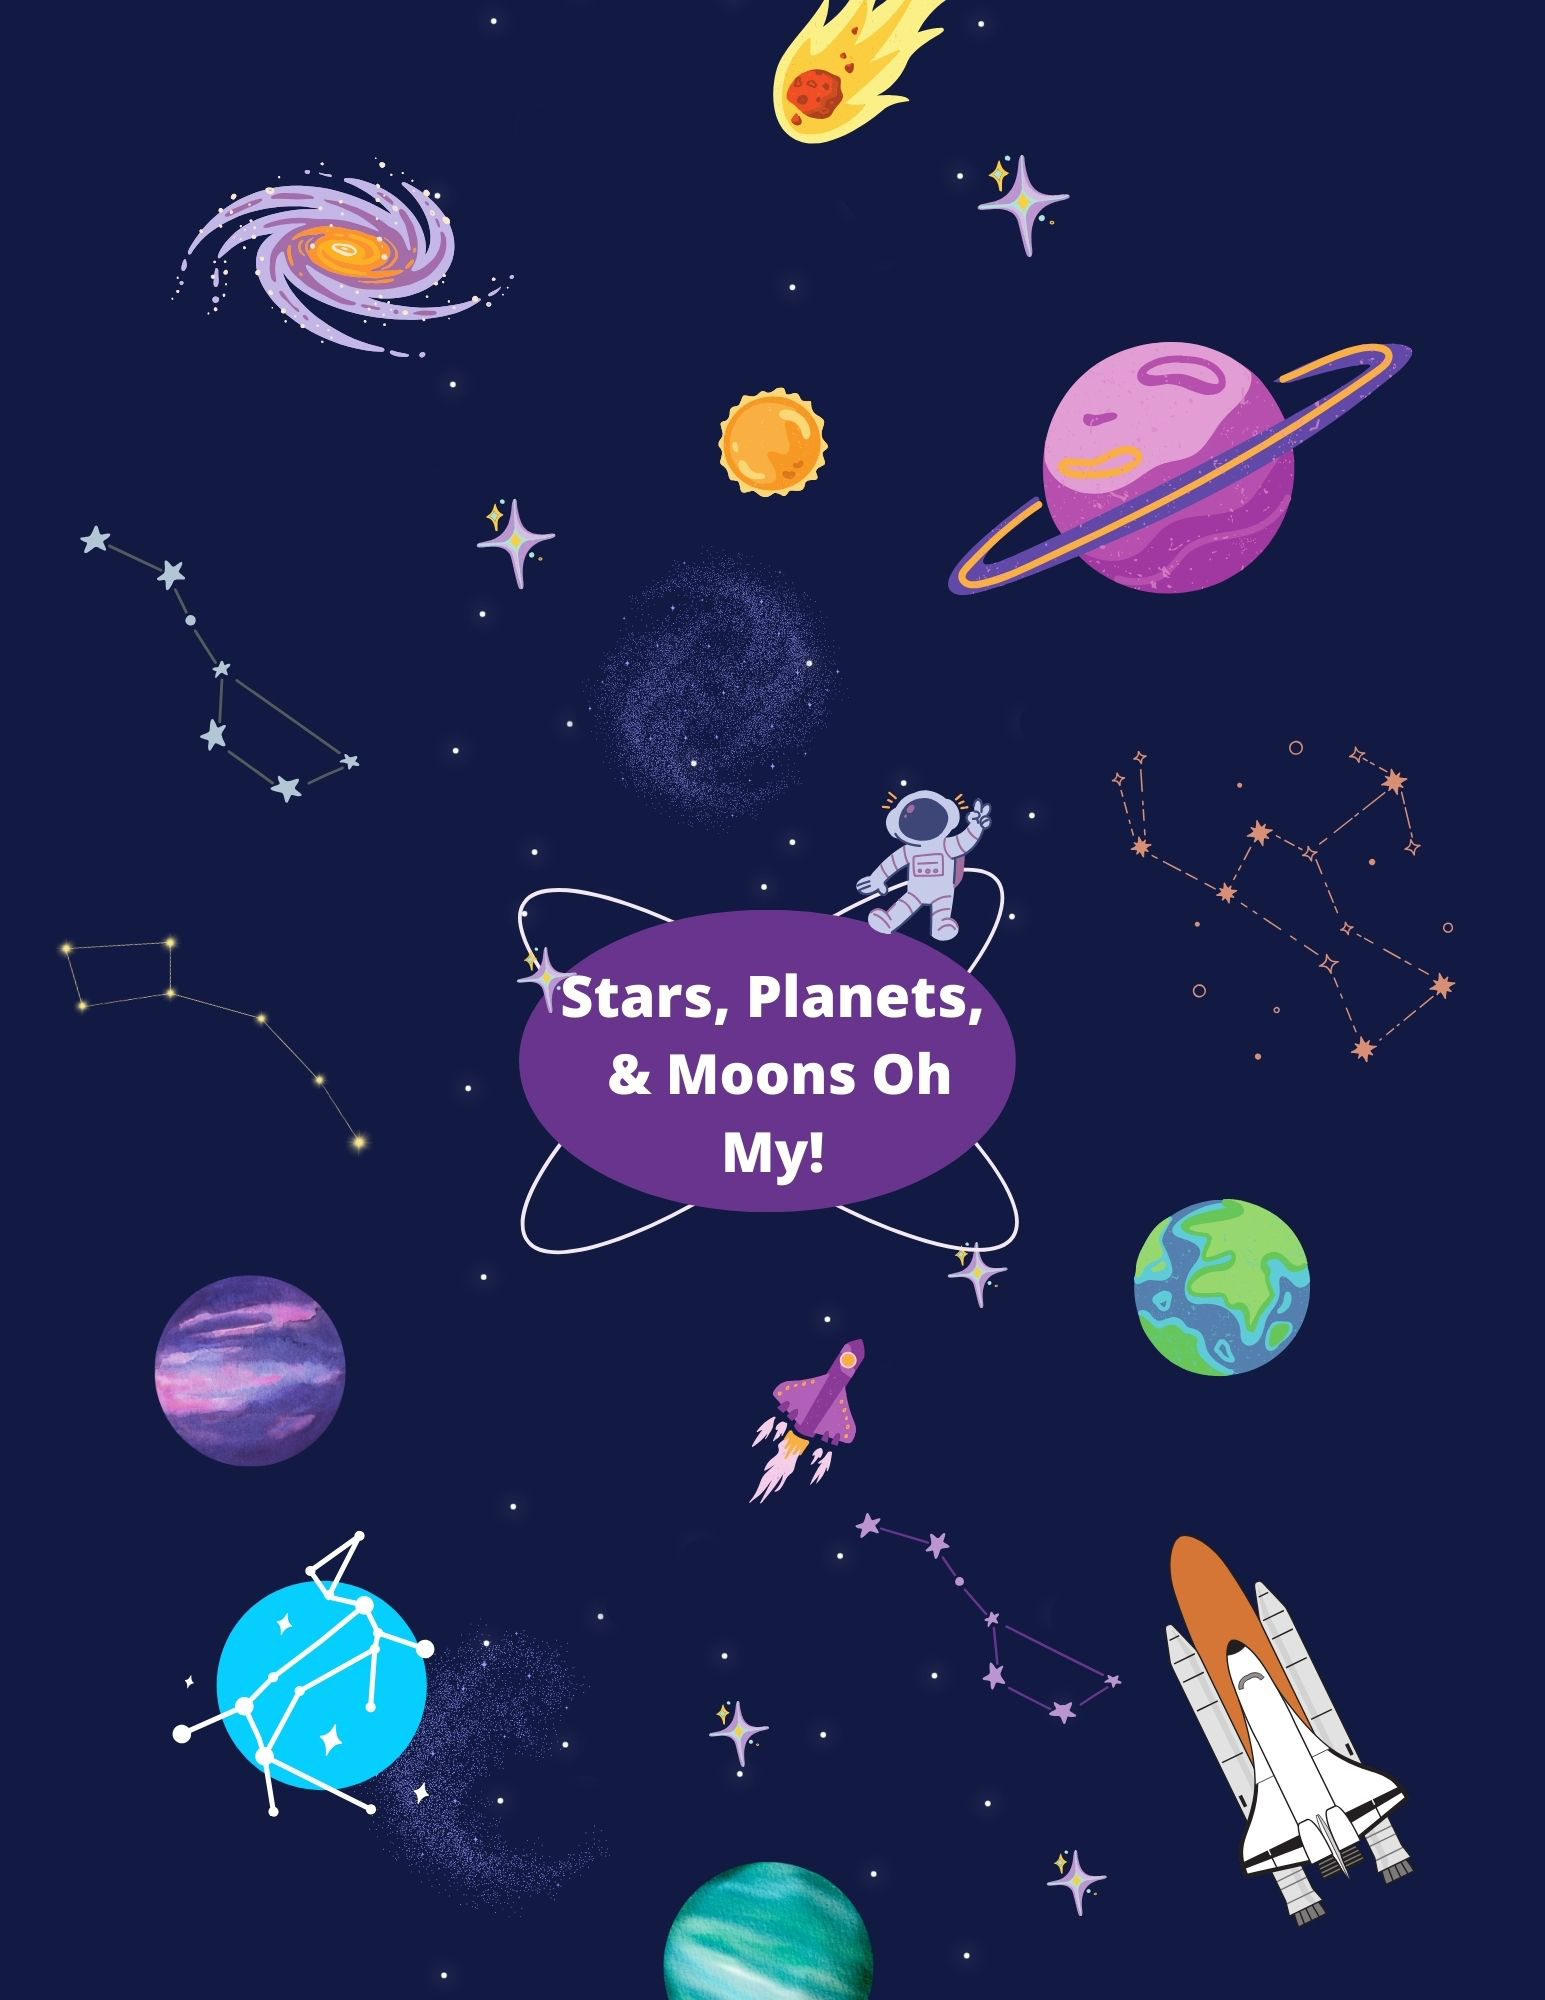 Large stylized space graphic that says "Stars, Planets, and Moons Oh My!"